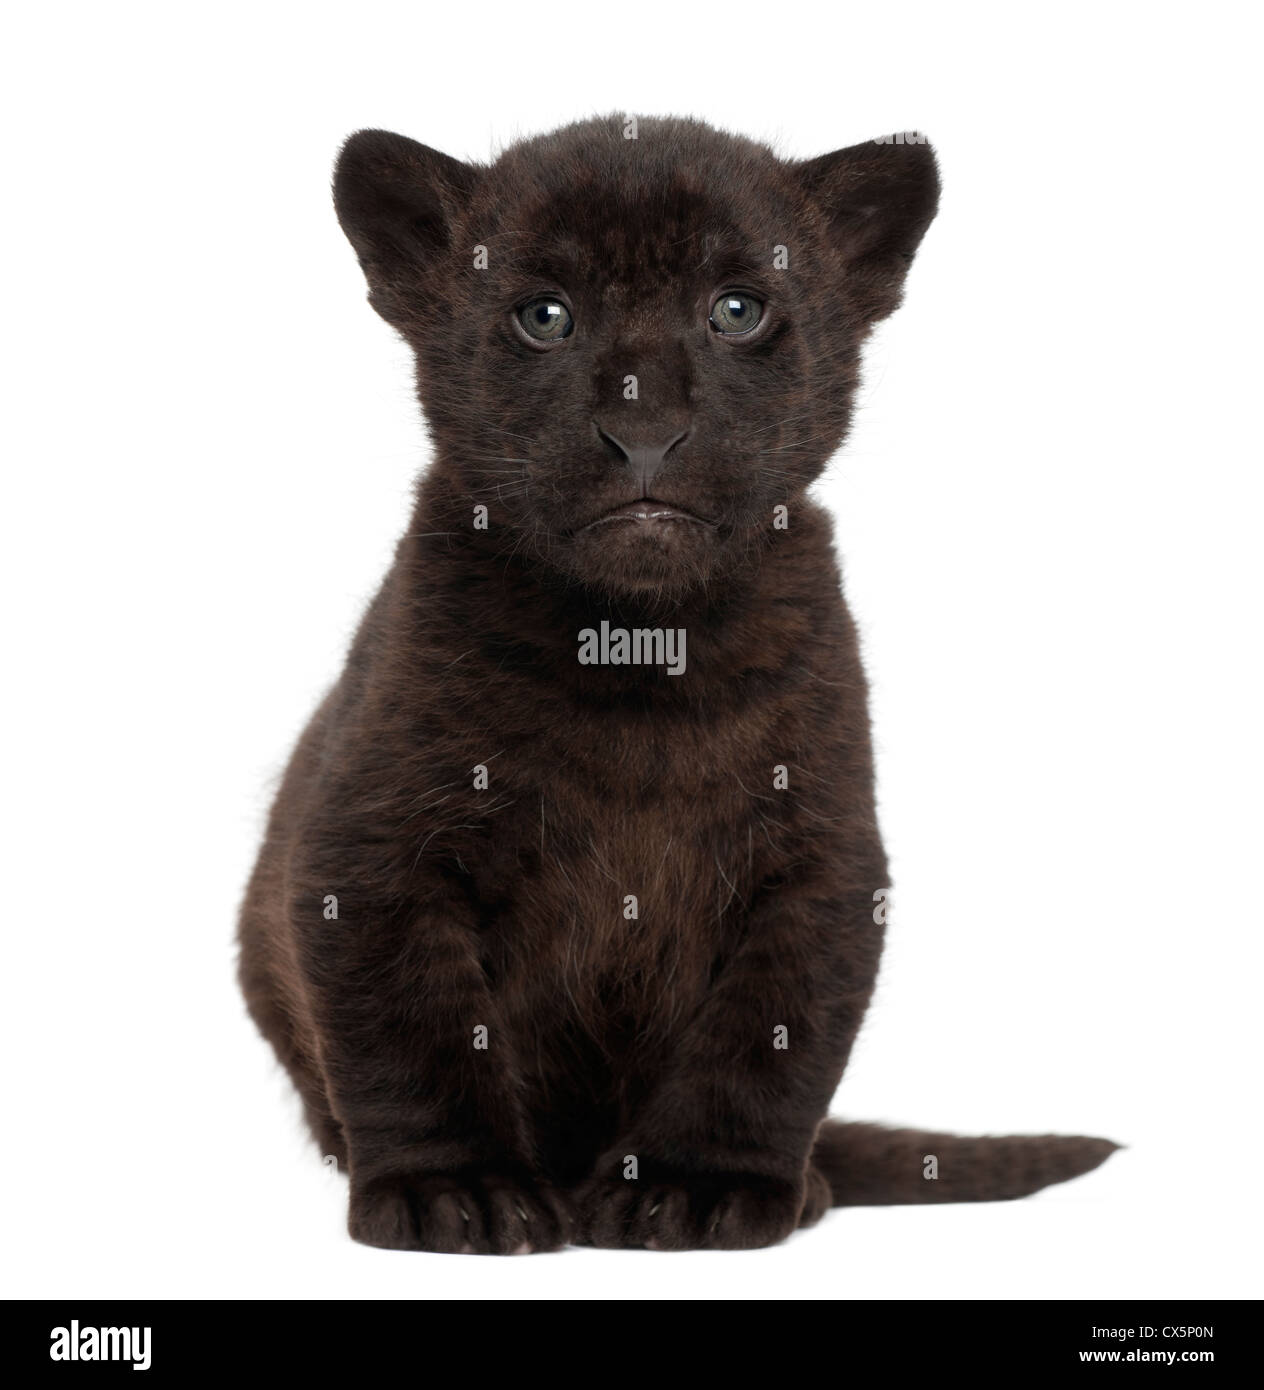 Jaguar cub, 2 months old, Panthera onca, sitting against white background Stock Photo